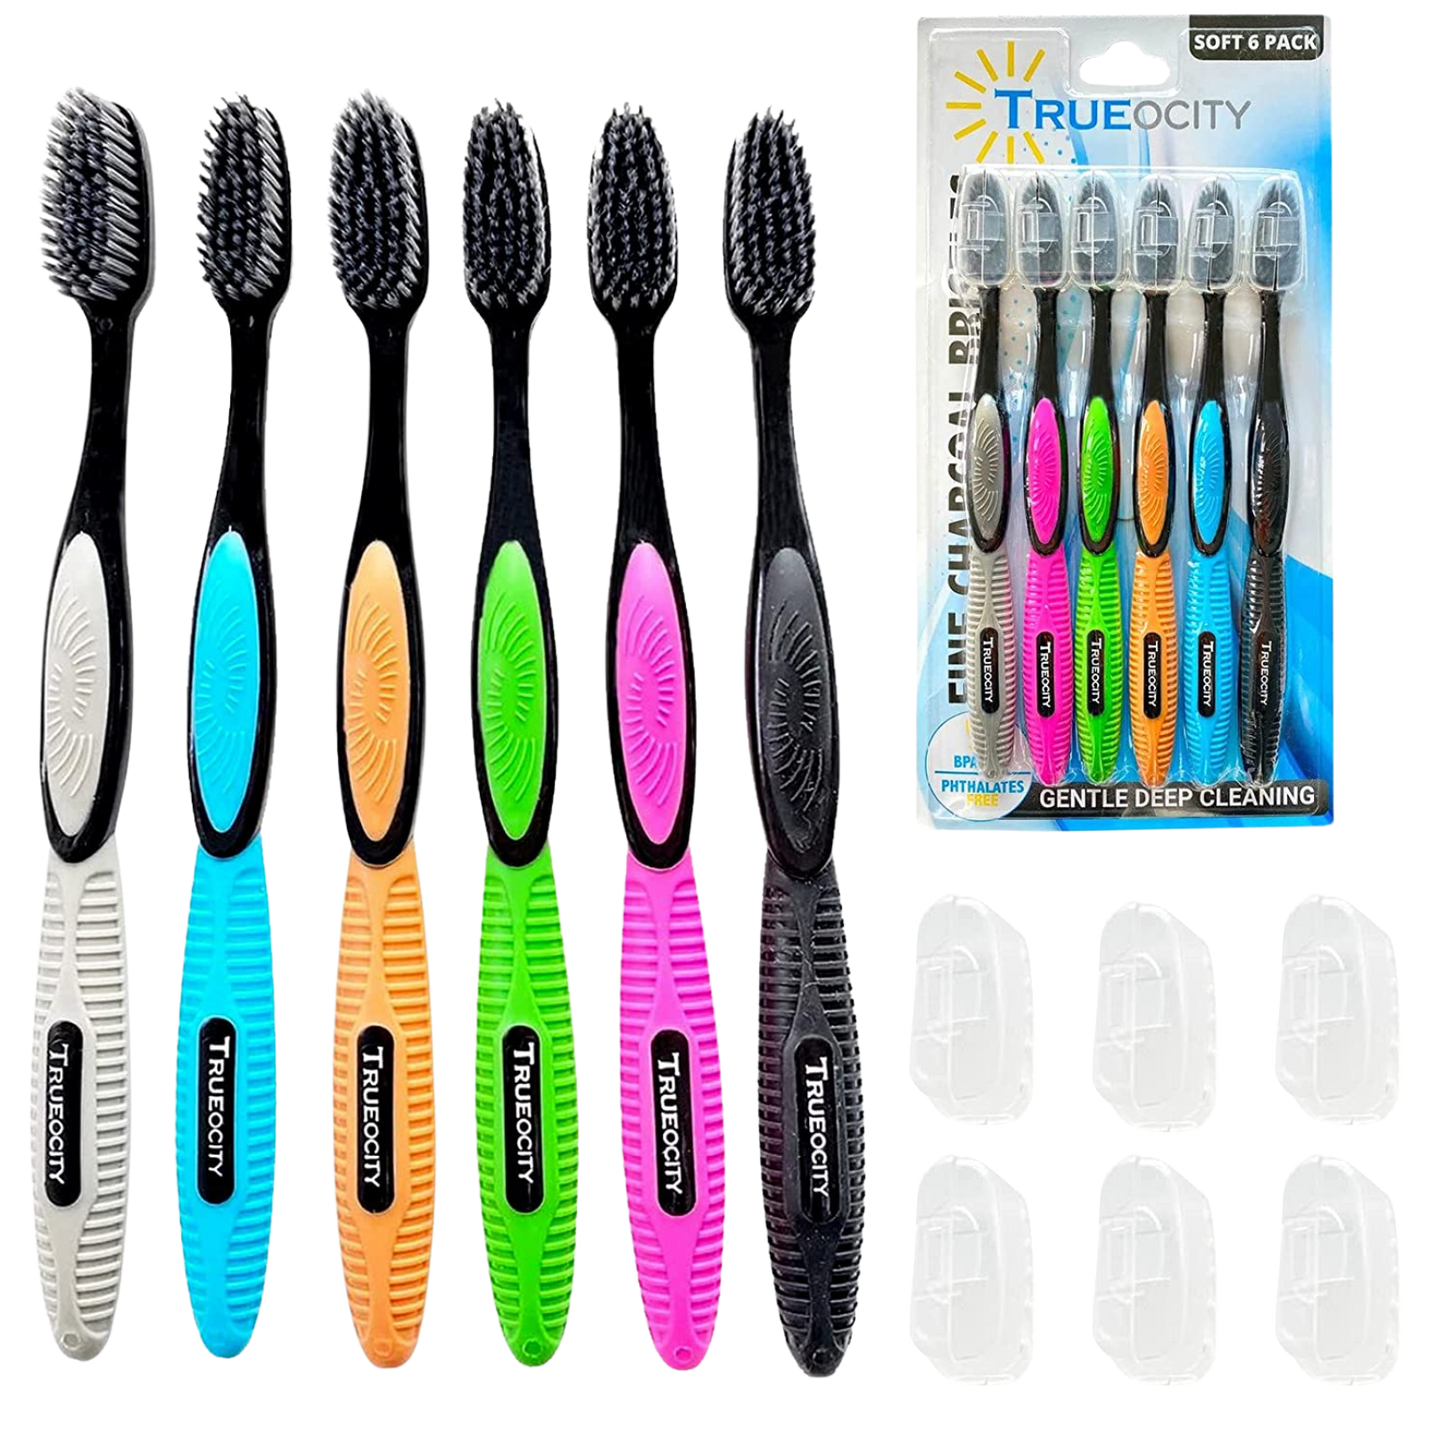 Charcoal Toothbrush, Natural Teeth Whitening Solution - 6 Pack